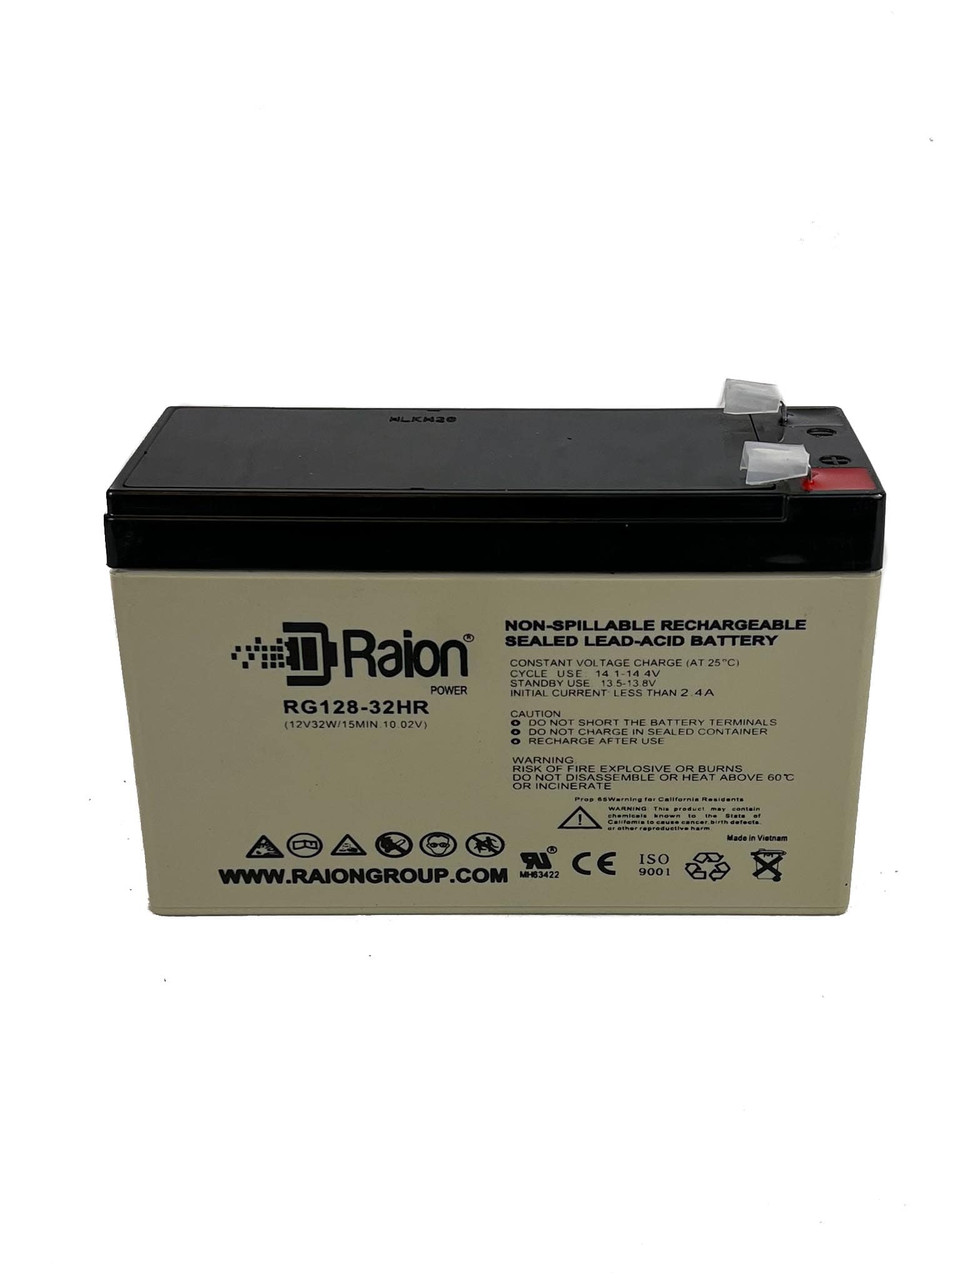 Raion Power 12V 7.5Ah UPS Battery With T2 Terminals For Alpha Technologies PINBP2000/3000RM (033-751-22)